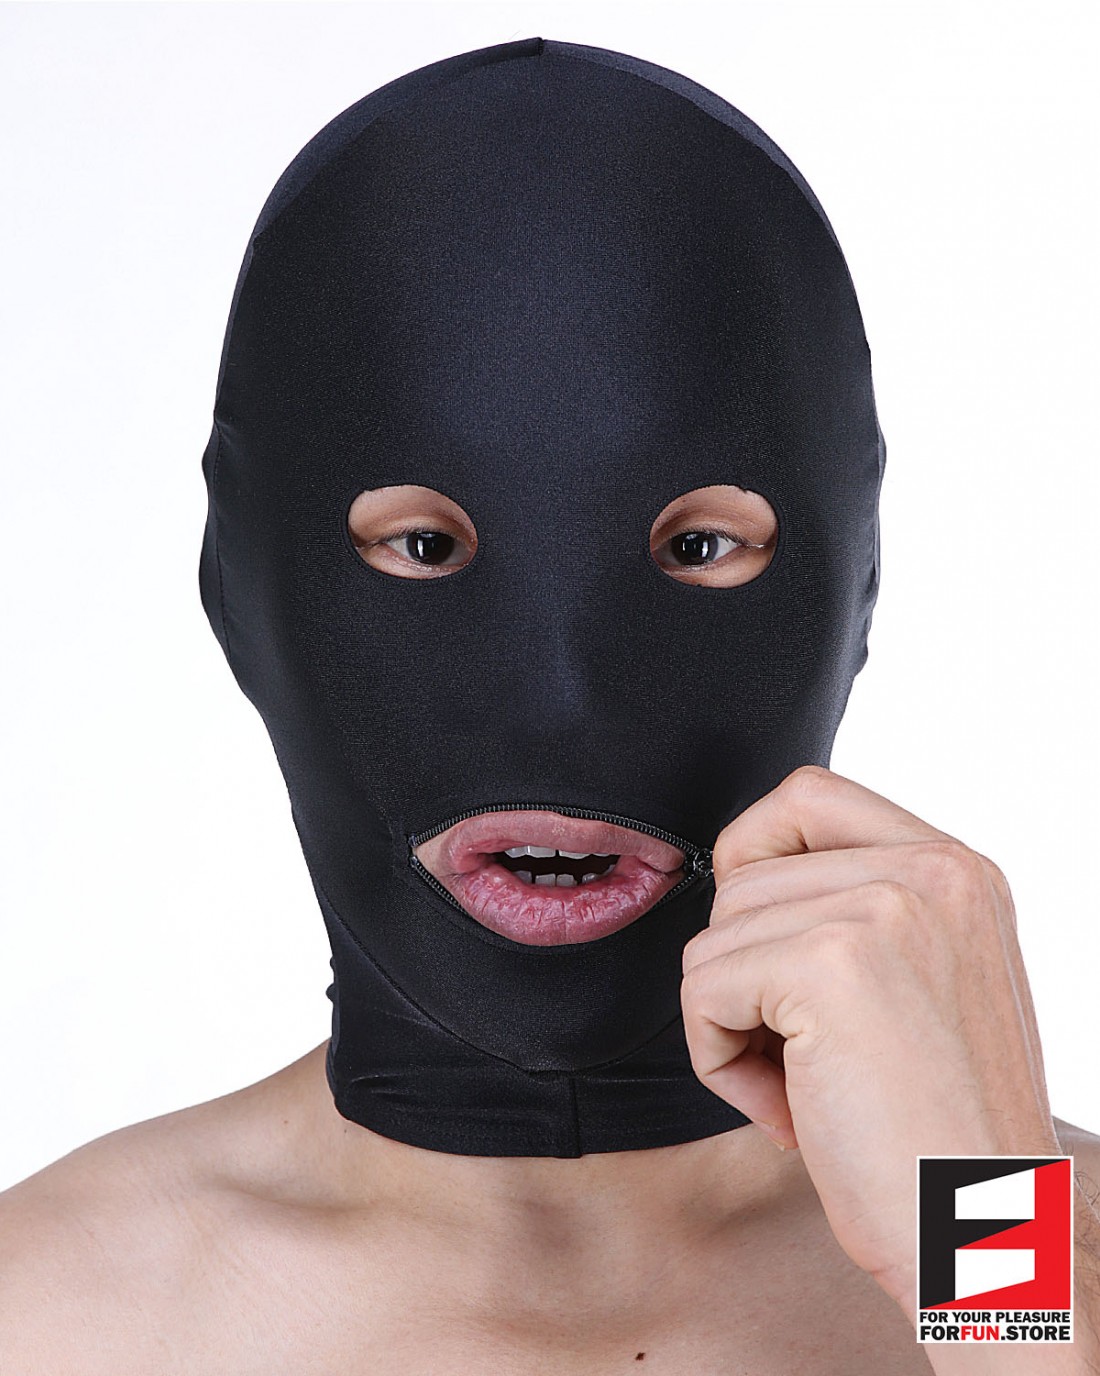 SPANDEX MASK FOR YOUR PLEASURE : FORFUN